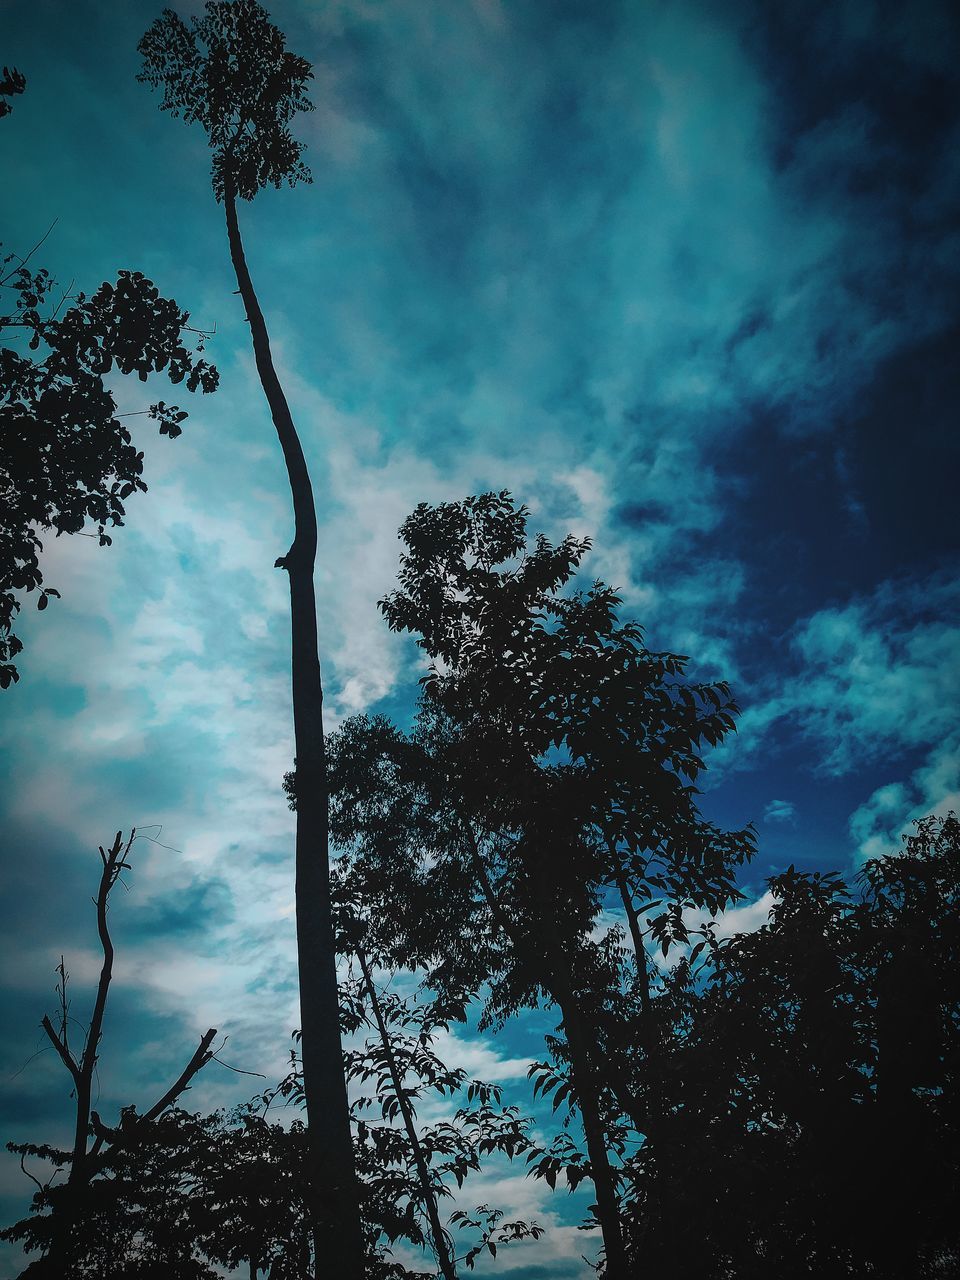 tree, sky, plant, cloud, nature, darkness, low angle view, sunlight, beauty in nature, silhouette, no people, growth, tranquility, forest, scenics - nature, outdoors, environment, morning, land, branch, pinaceae, dusk, coniferous tree, pine tree, blue, tree trunk, reflection, tranquil scene, light, trunk, non-urban scene